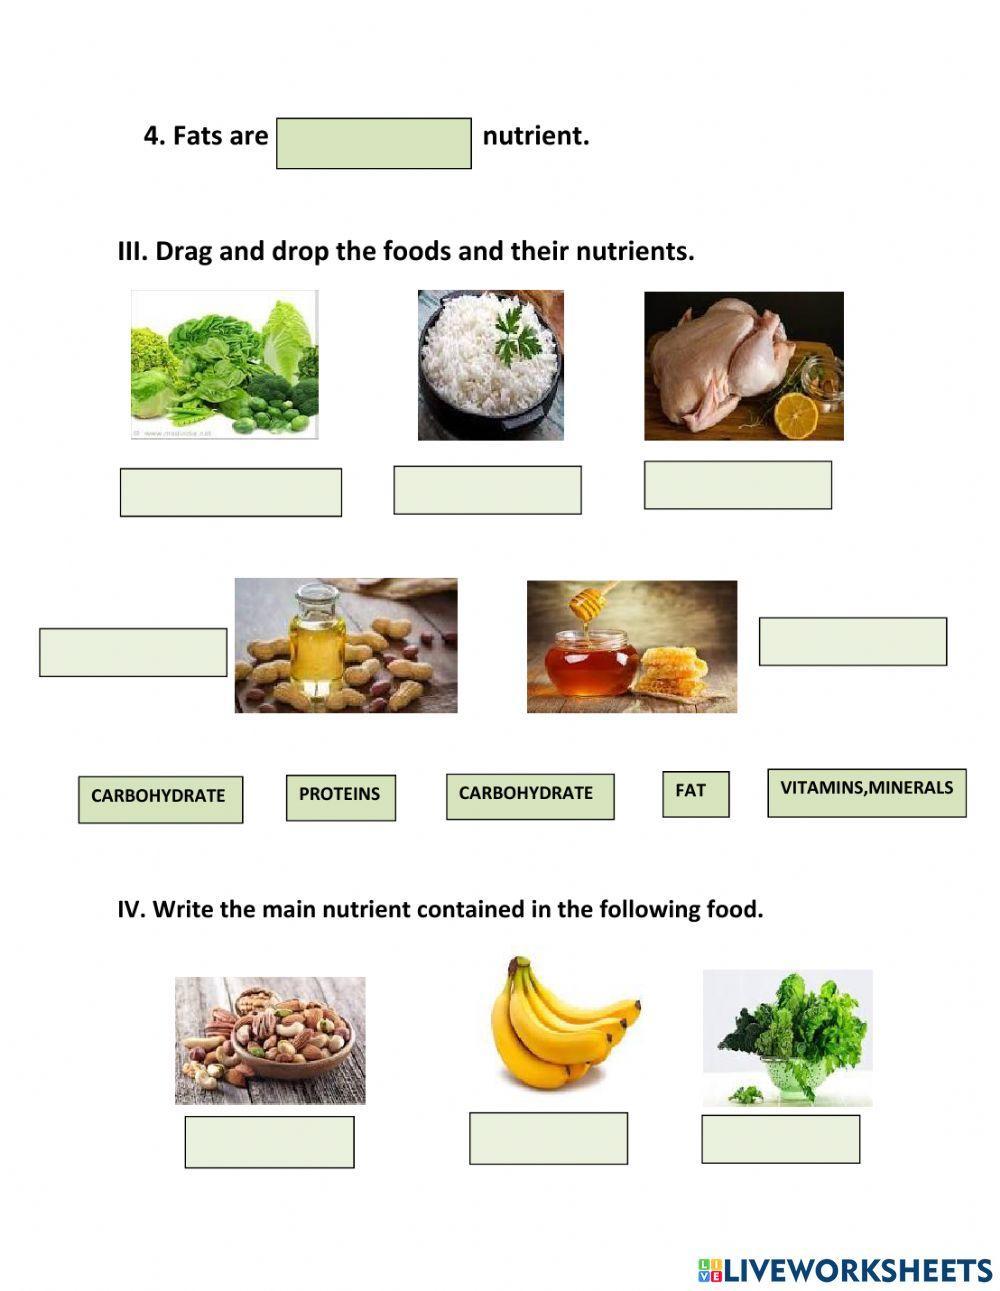 Food and Nutrients